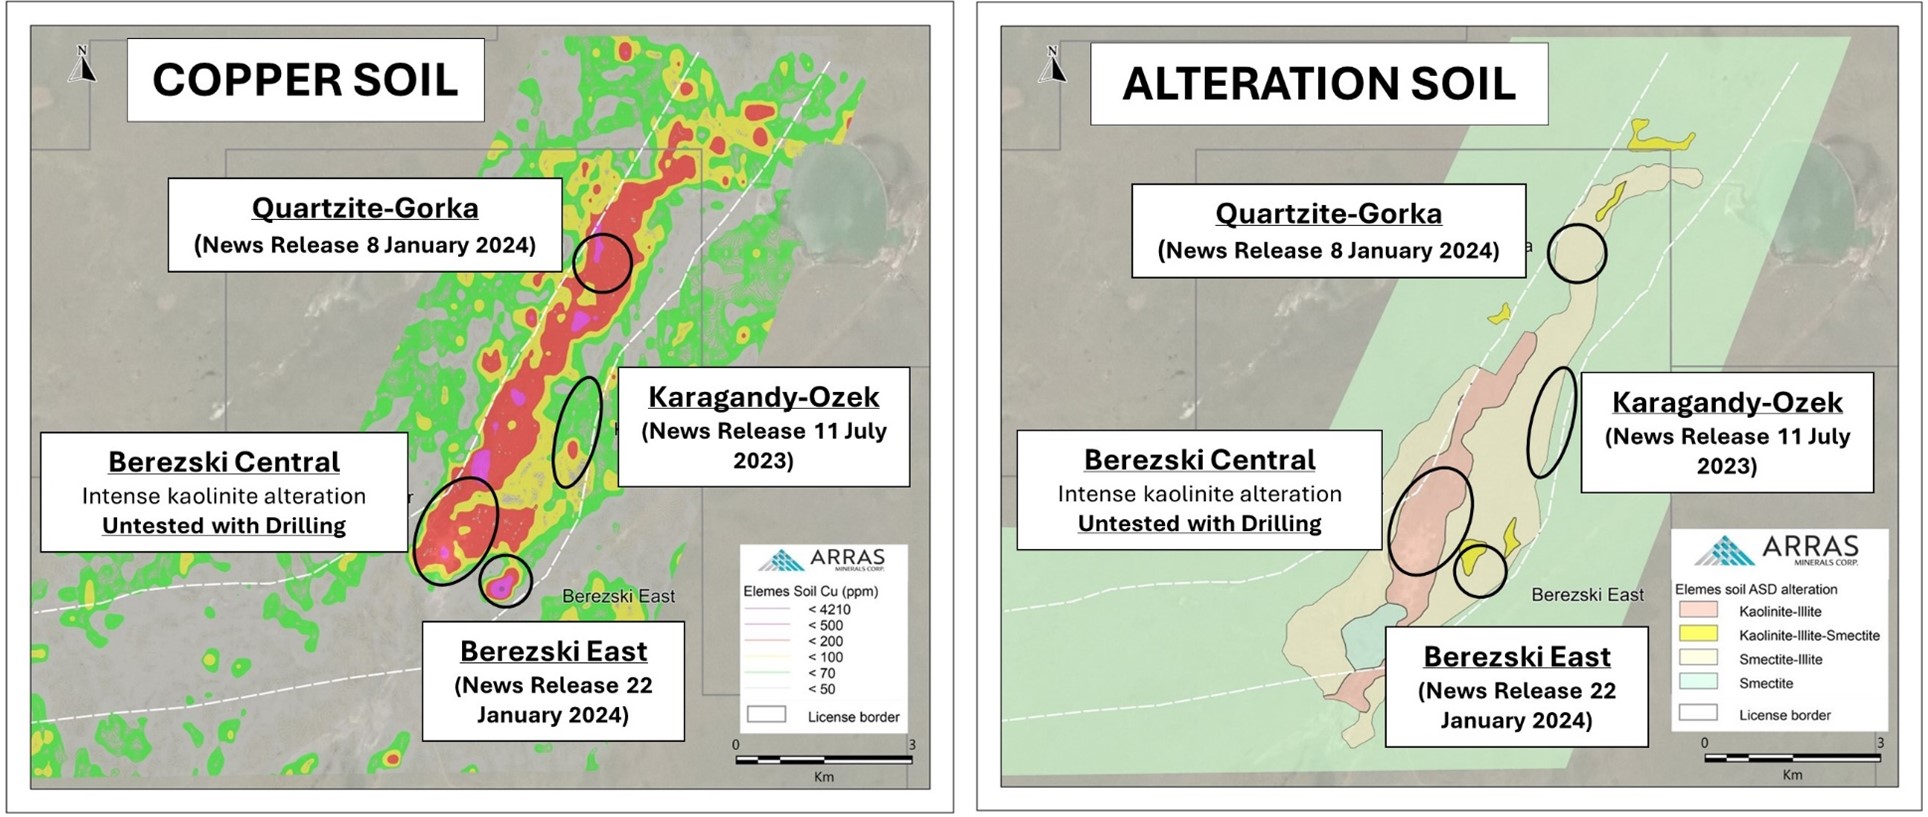 Soil anomaly maps showing copper results and the alteration map. Also shown are the locations of the re-assayed drillholes located at Quartzite-Gorka and Berezski East as well as Karagandy-Ozek, a high-grade gold-silver epithermal zone.  The intensely altered Berezski Central zone is also shown which is co-incident with the 2.8 kilometer x 1.6 kilometer molybdenum soil  anomaly (see figure 4).